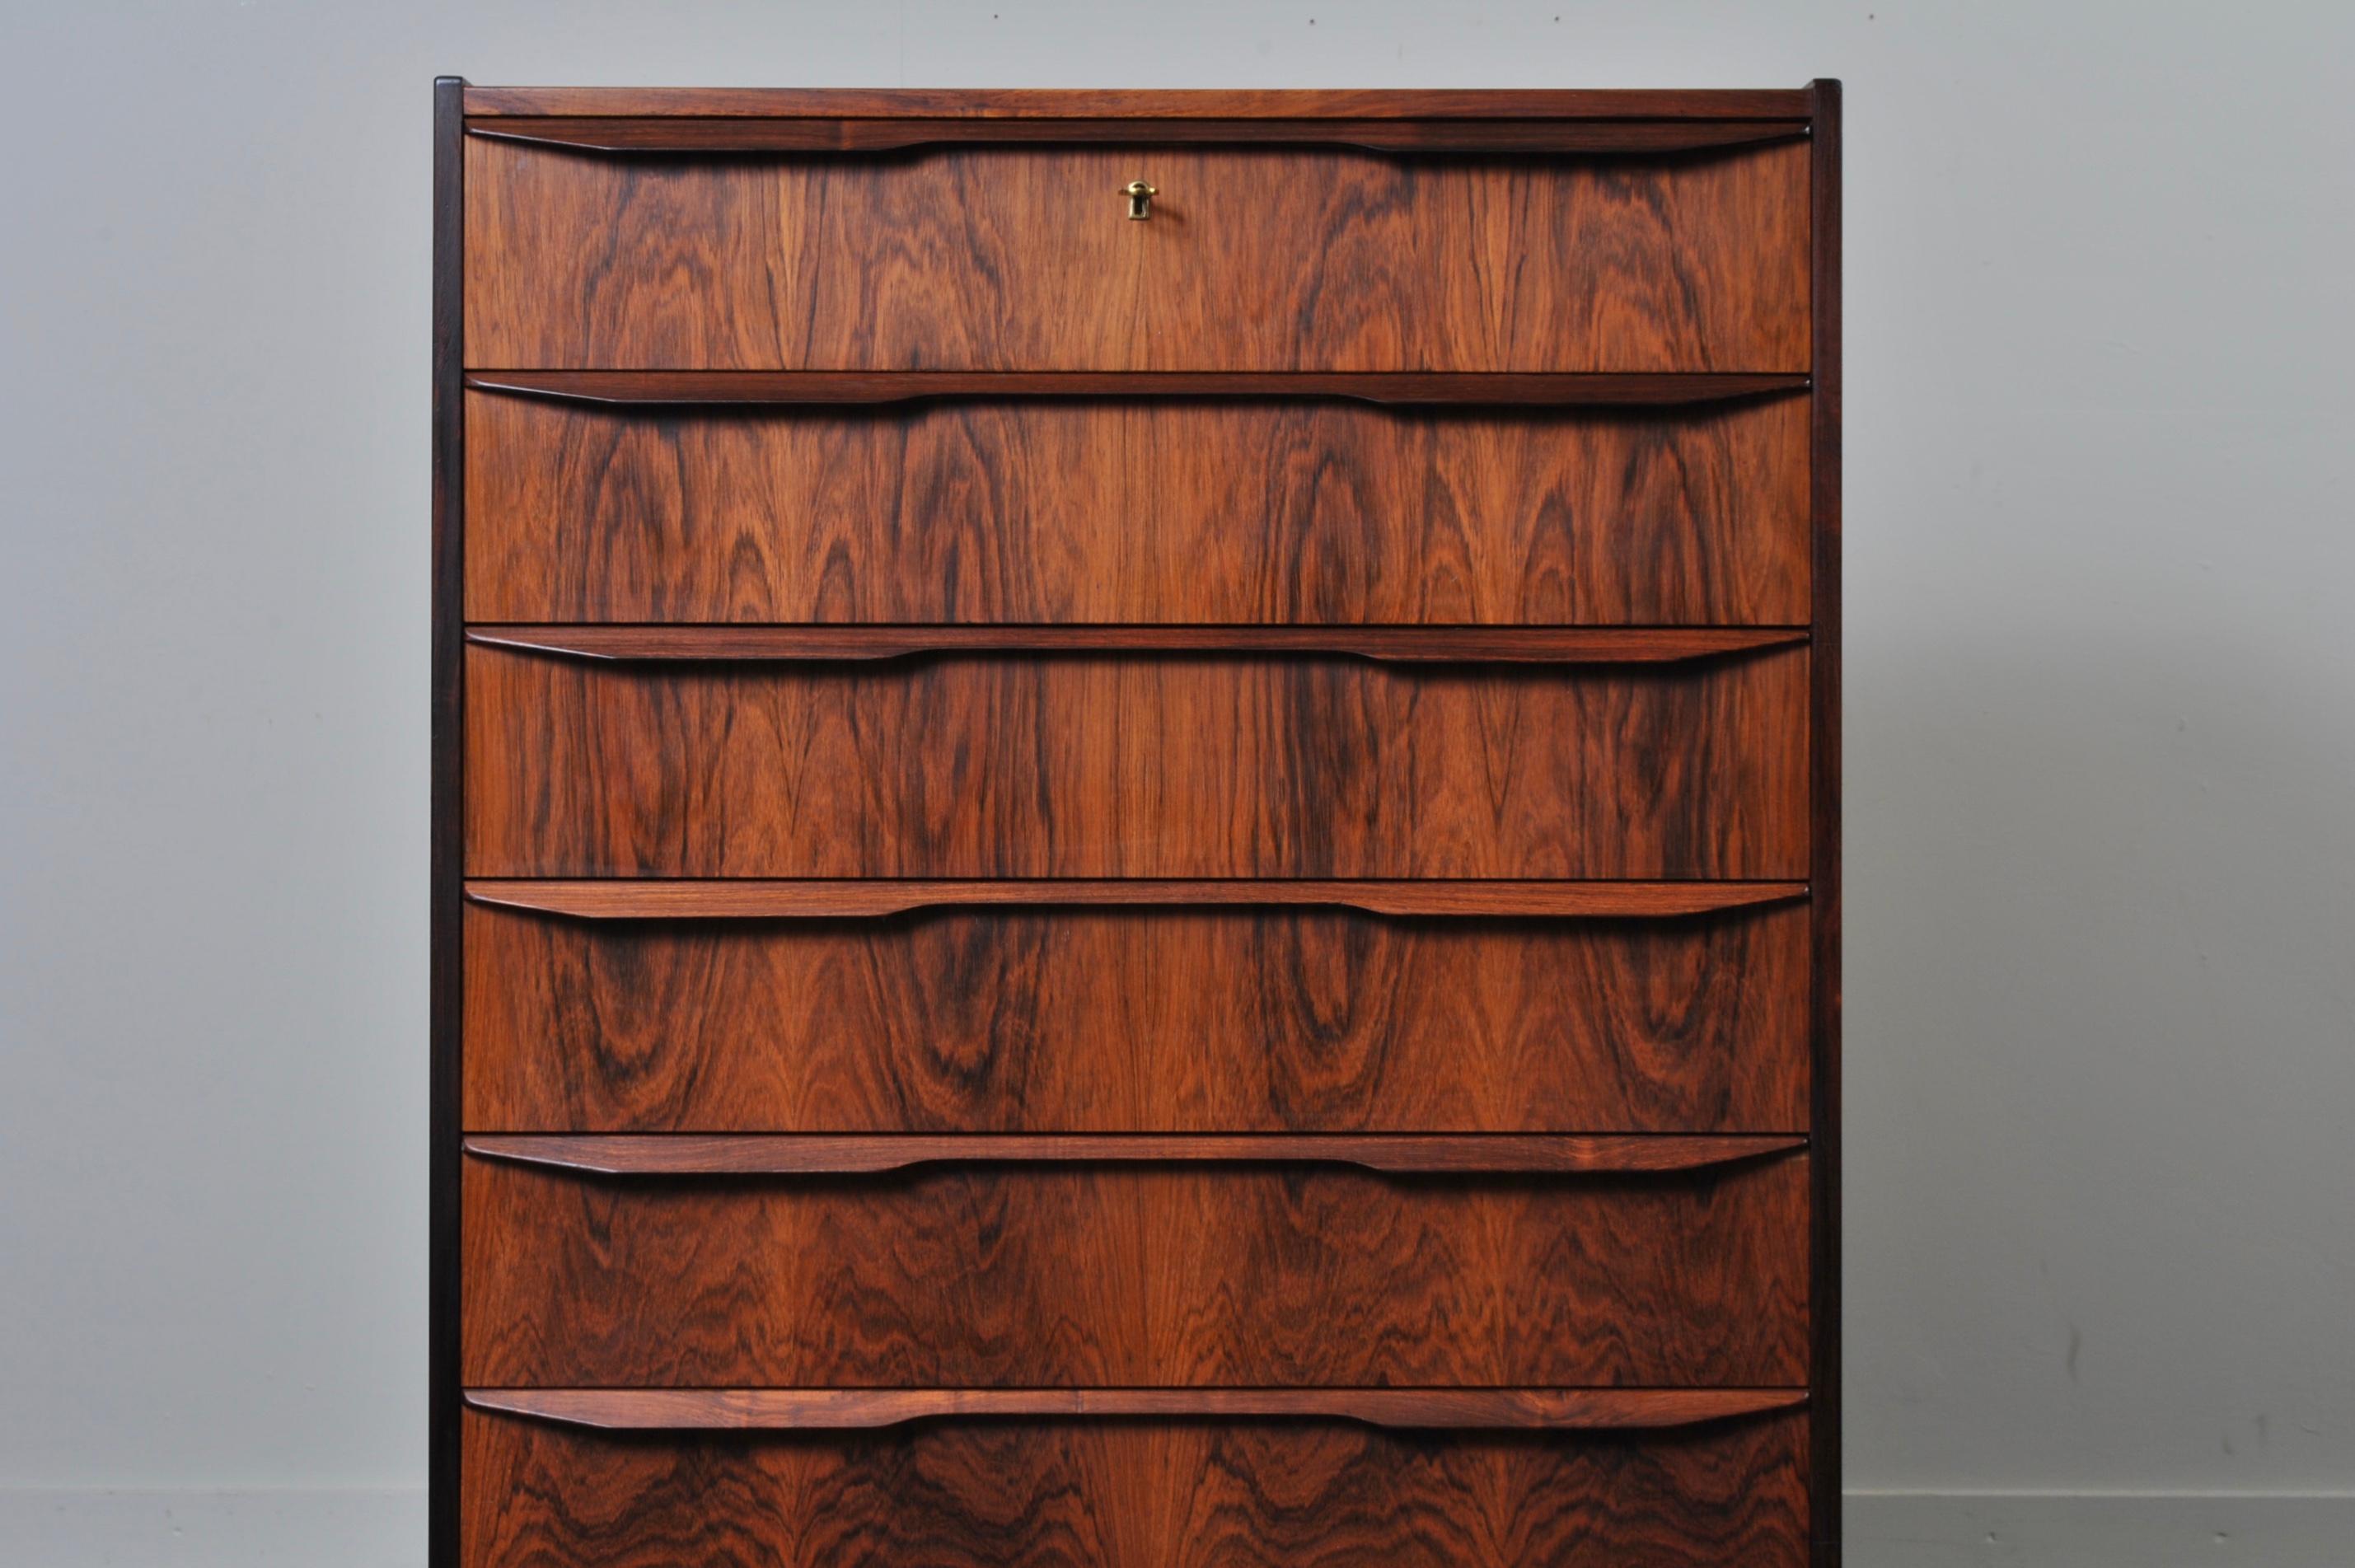 A Danish midcentury rosewood tallboy chest of drawers. Produced in Denmark, circa 1960. Lockable top drawer. Lipped handles. All drawer interiors are clean and in good condition throughout. Beautifully matched rosewood veneer frontage.